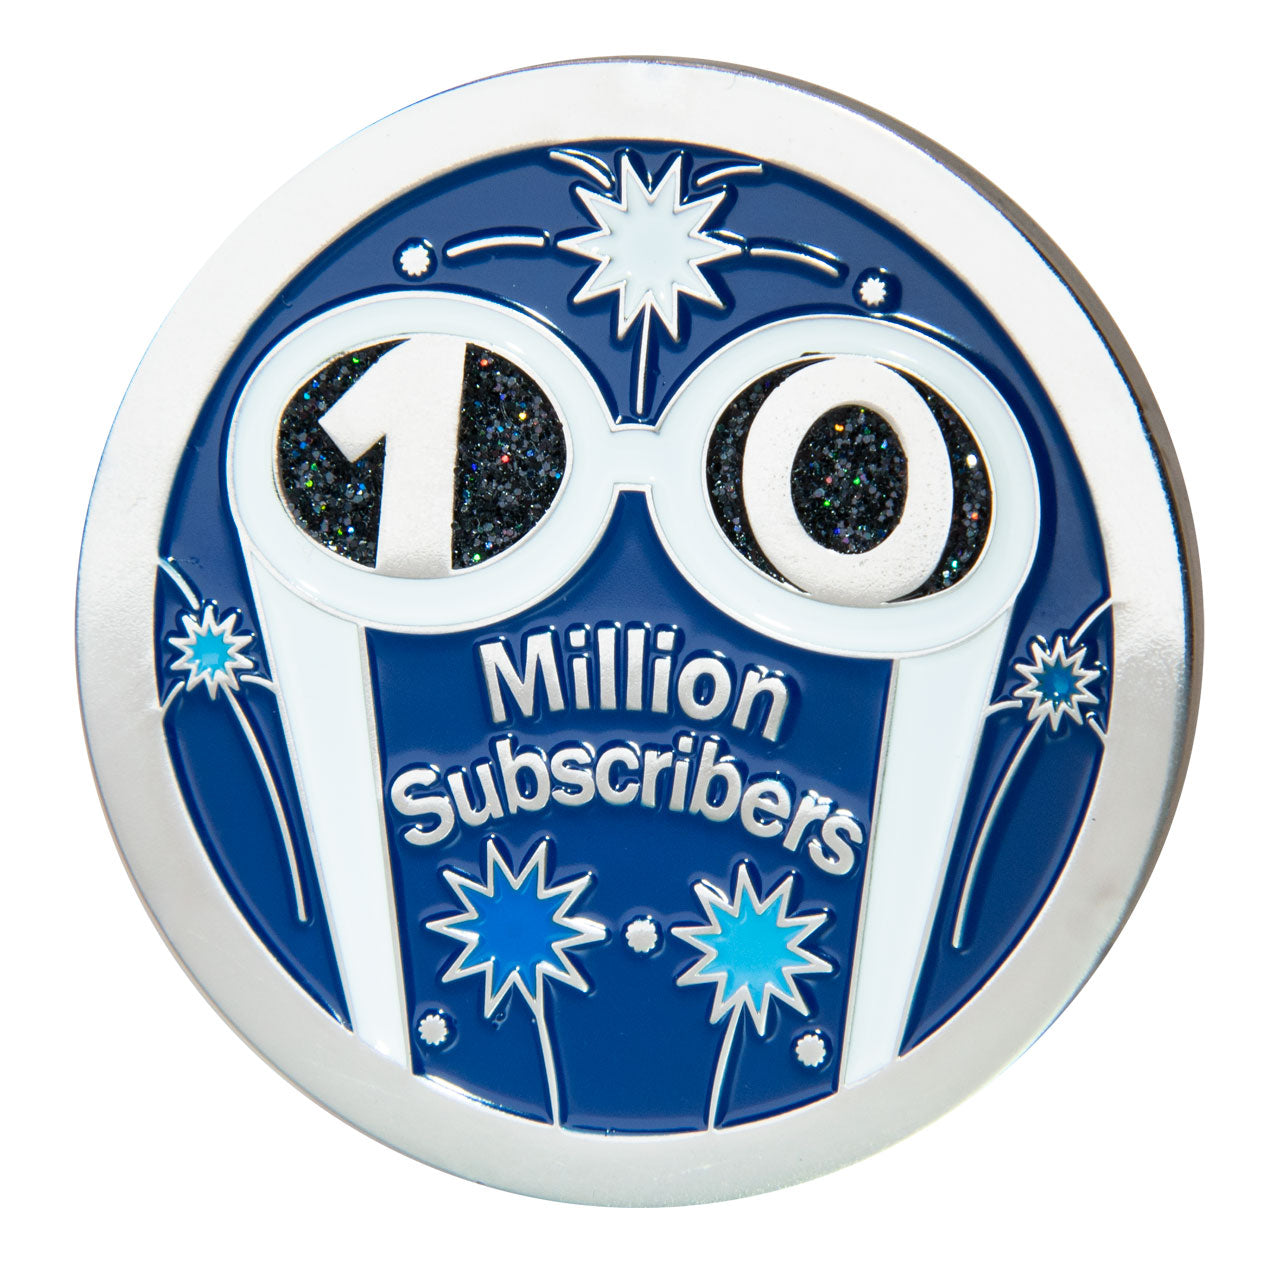 George 10 Million Subscribers Coin, Limited Edition